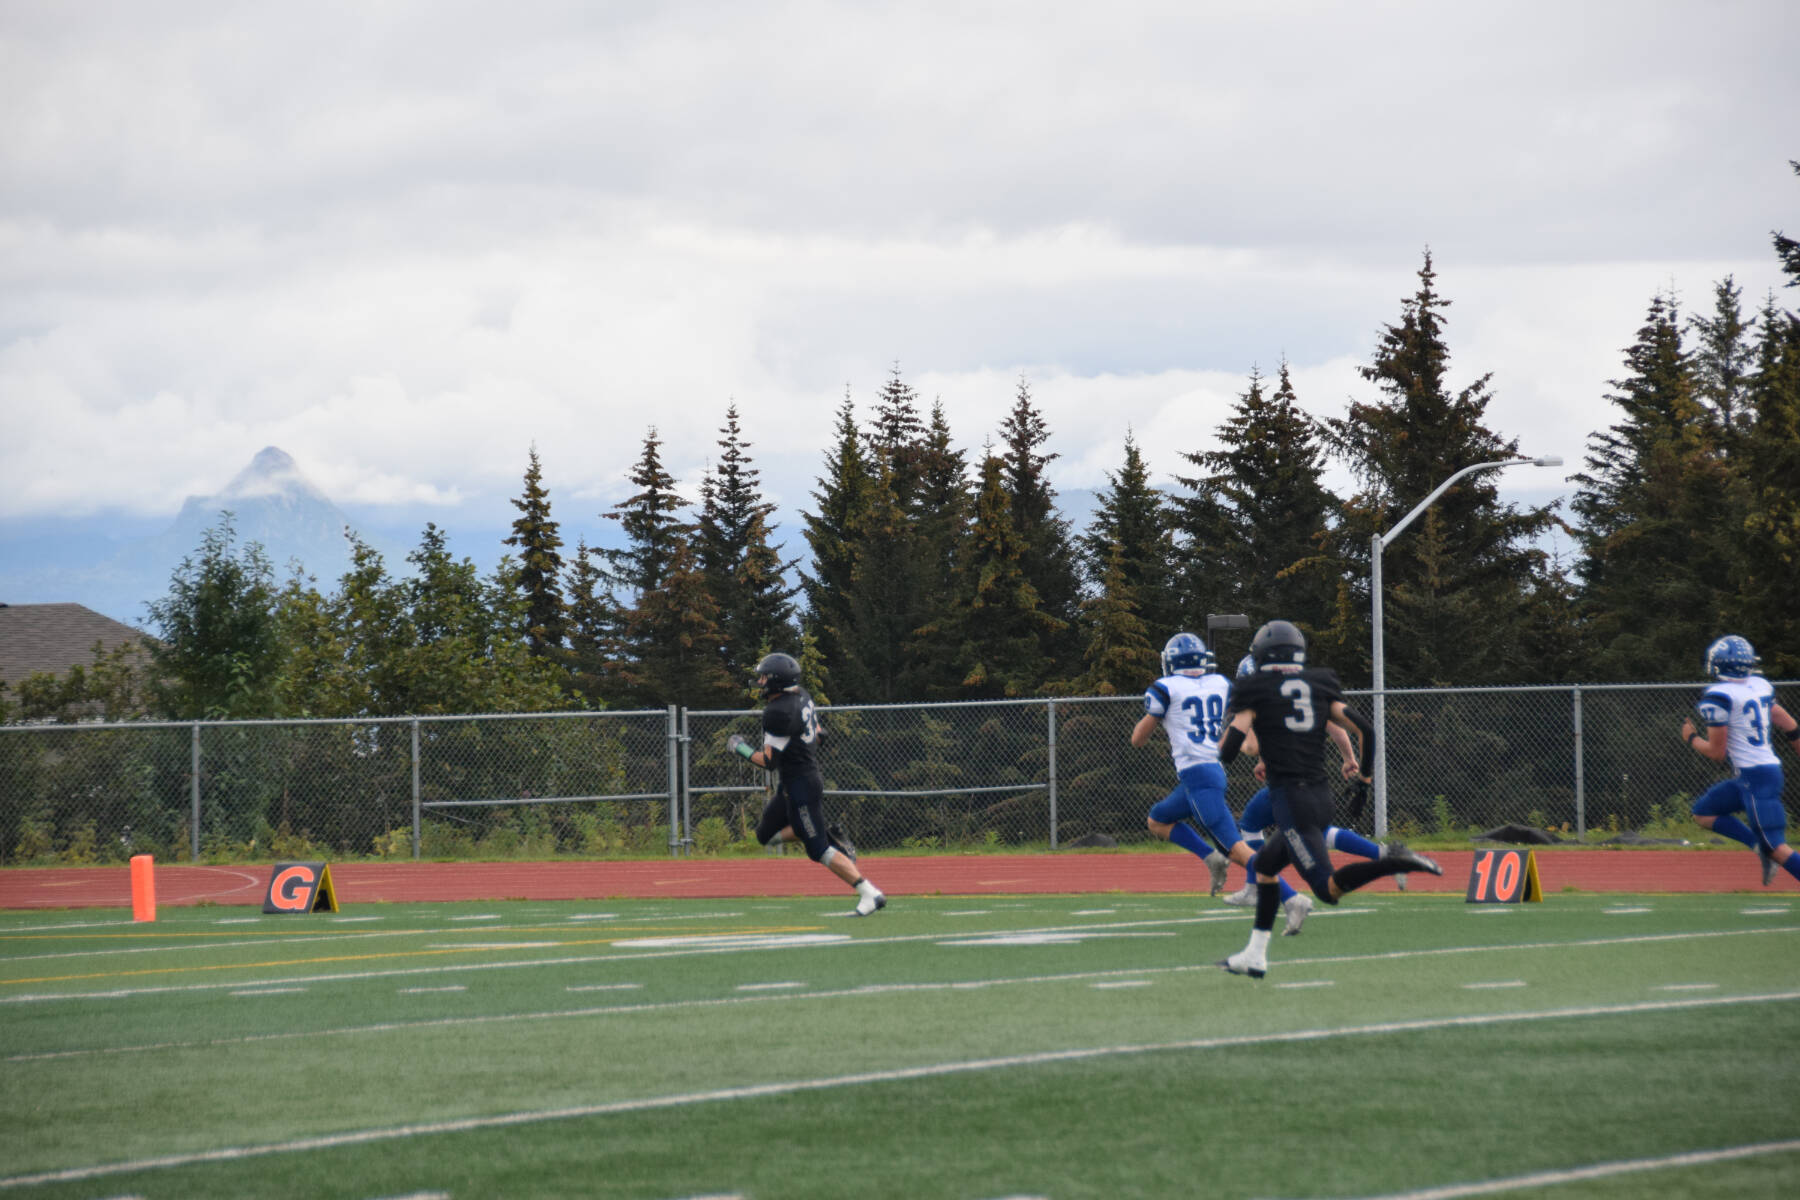 Jake Tappan runs to score the first touchdown for Homer at the homecoming game against Palmer on Friday, Sept. 8, 2023 in Homer, Alaska. (Delcenia Cosman/Homer News)